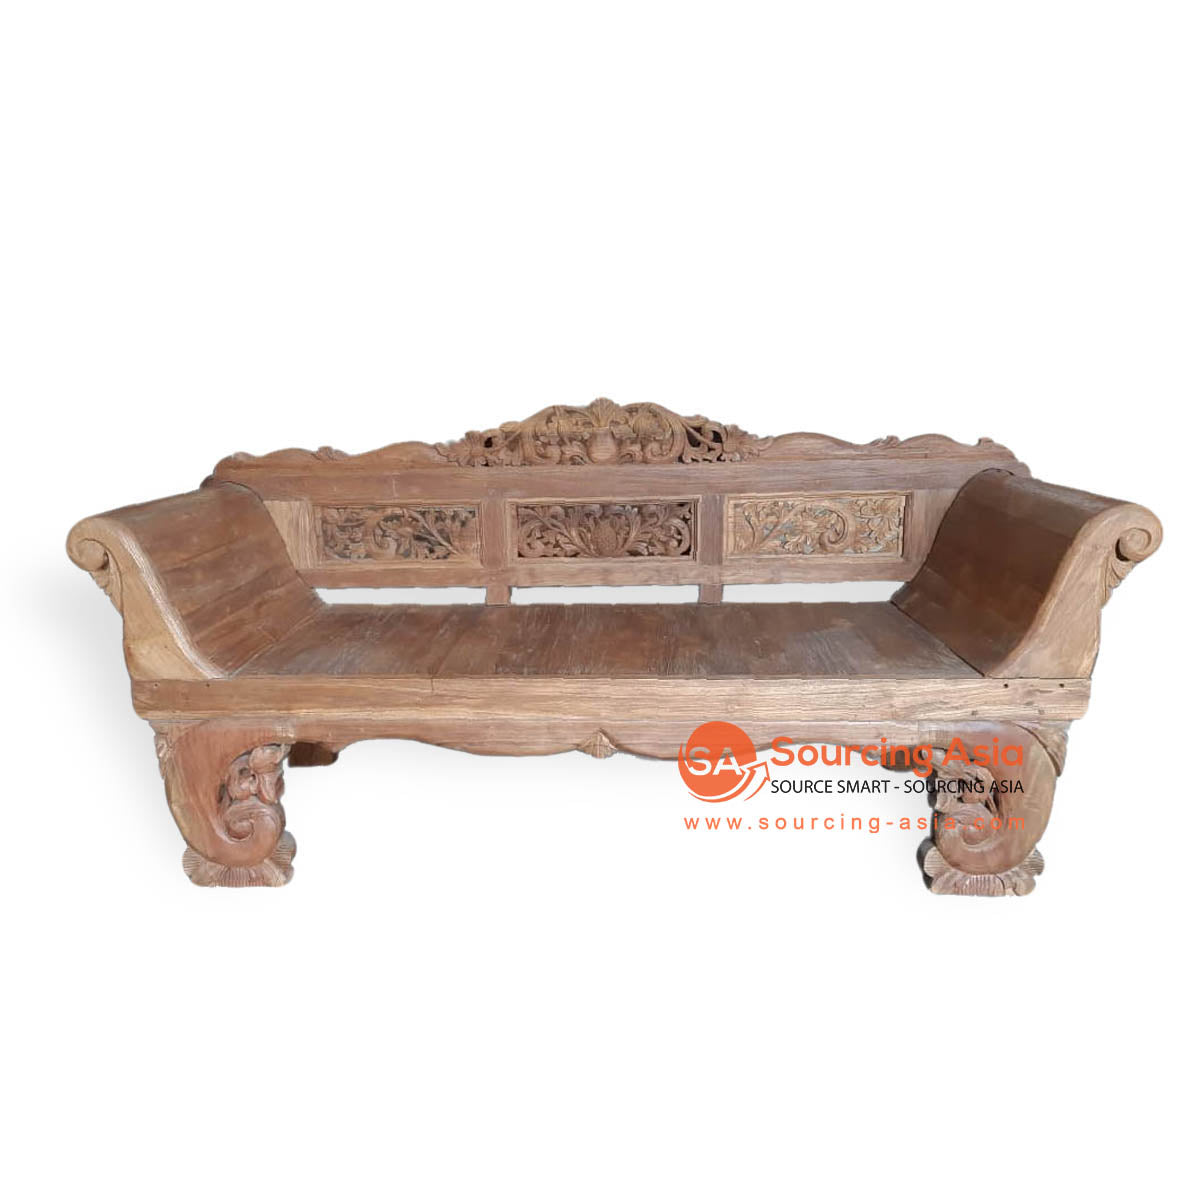 LAC063 NATURAL TEAK WOOD MADURA STYLE CARVED SOFA (PRICE WITHOUT CUSHION)